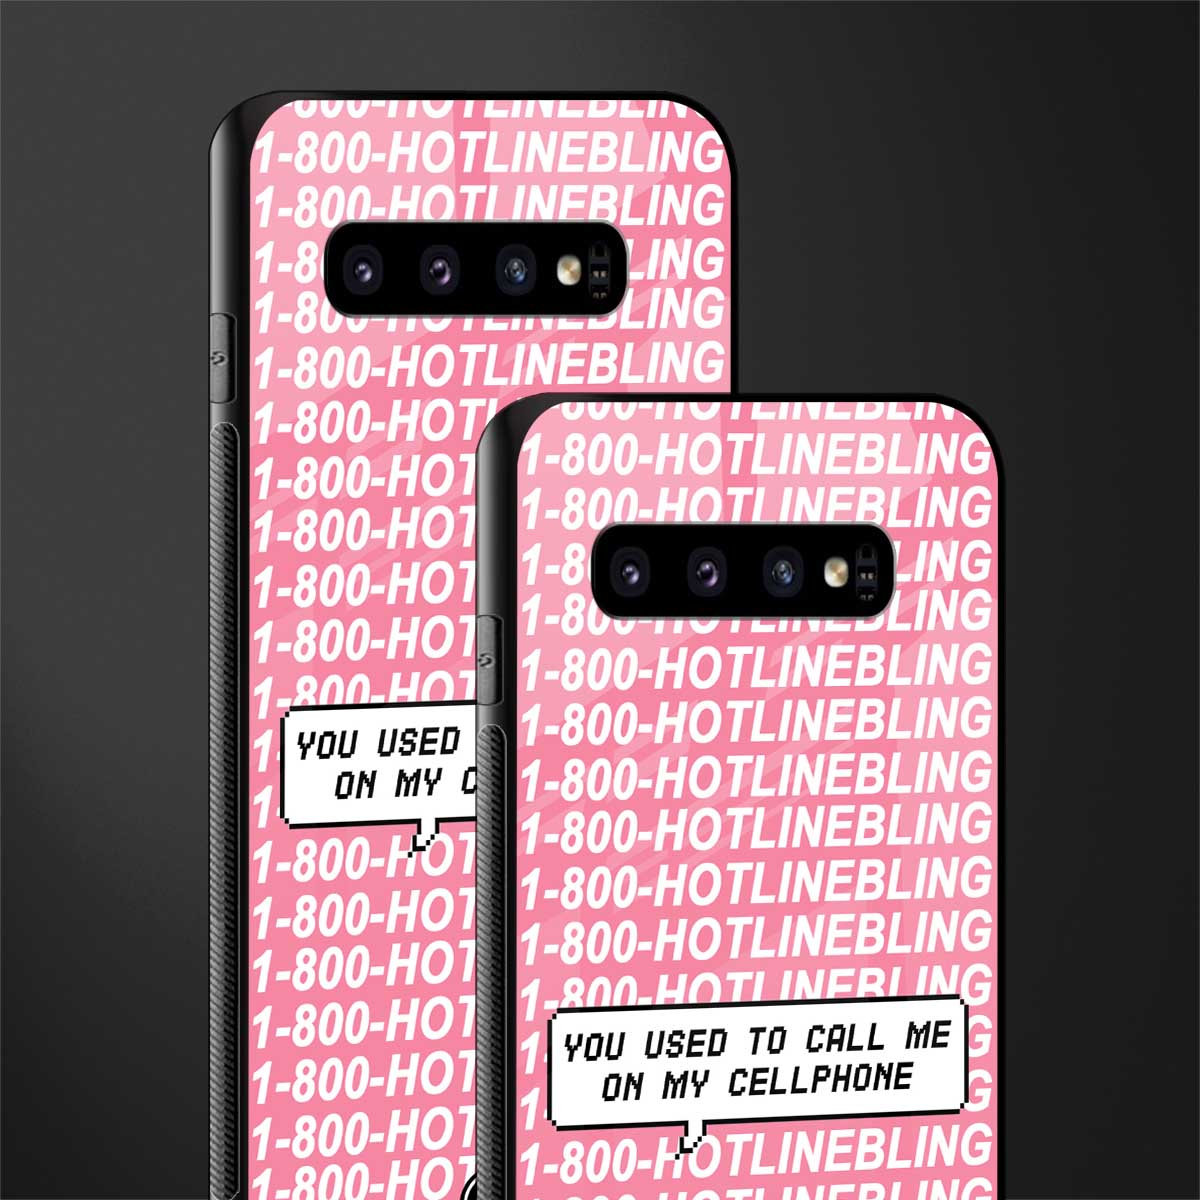 1800 hotline bling phone cover for samsung galaxy s10 